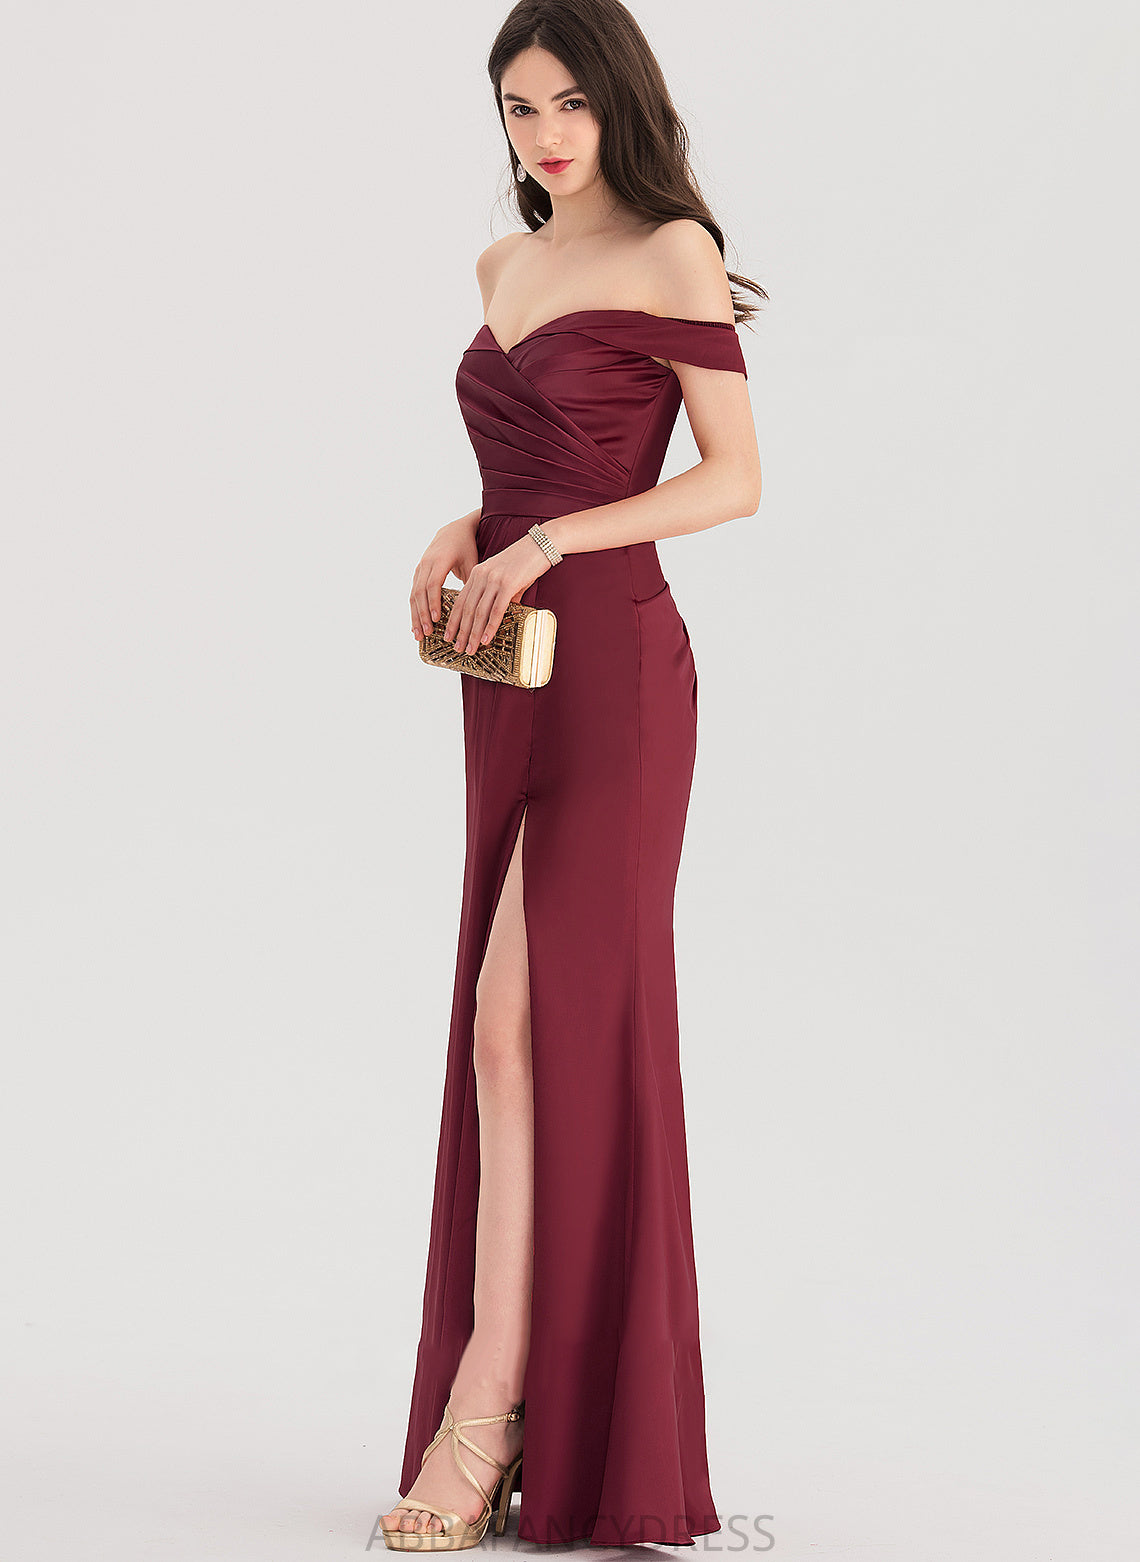 Ruffle Front Split Zoey With Sheath/Column Satin Off-the-Shoulder Floor-Length Prom Dresses